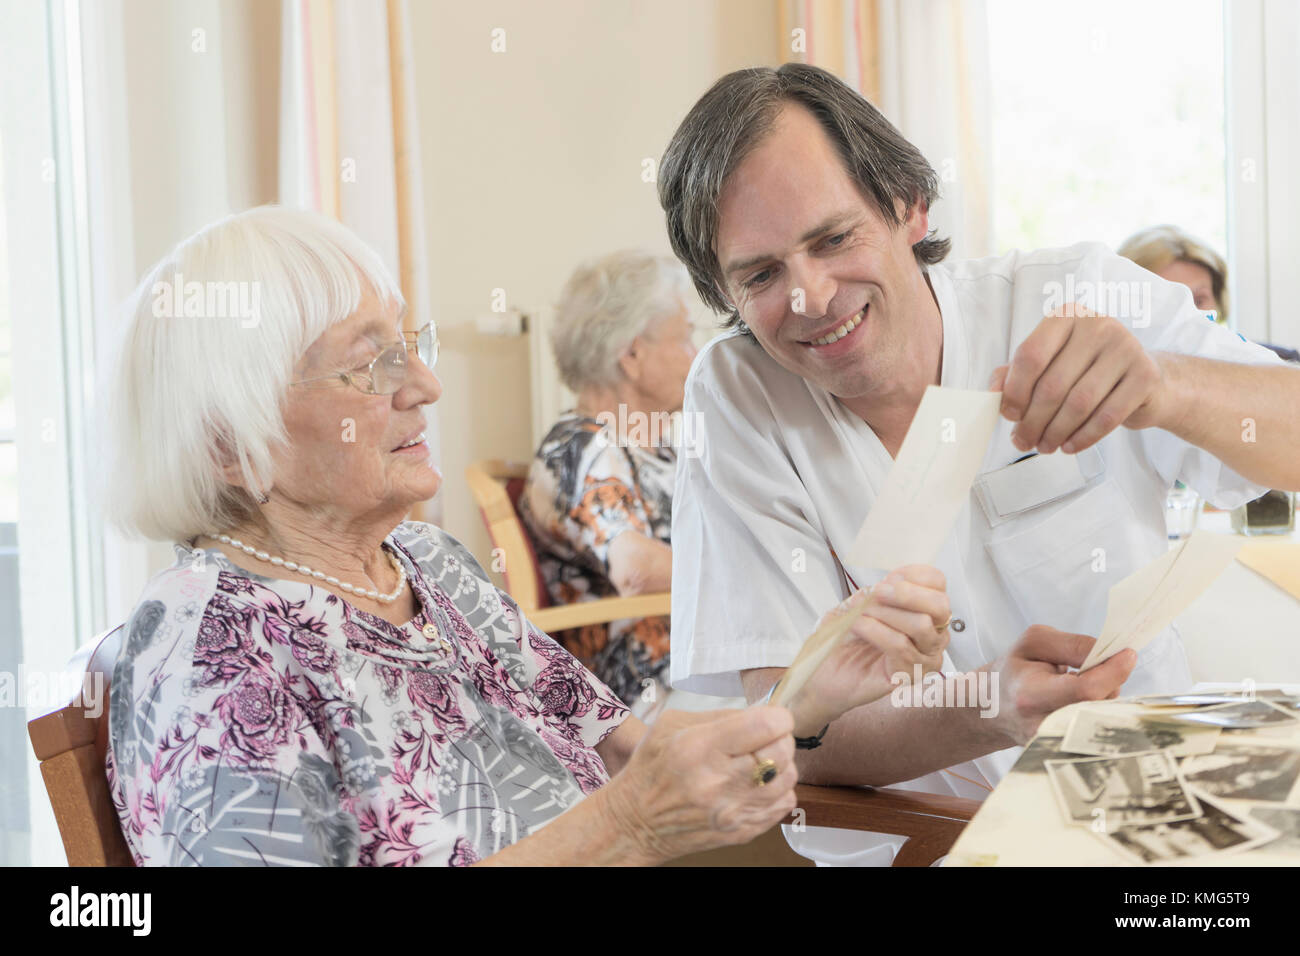 Caretaker watching photos with senior women at rest home Stock Photo